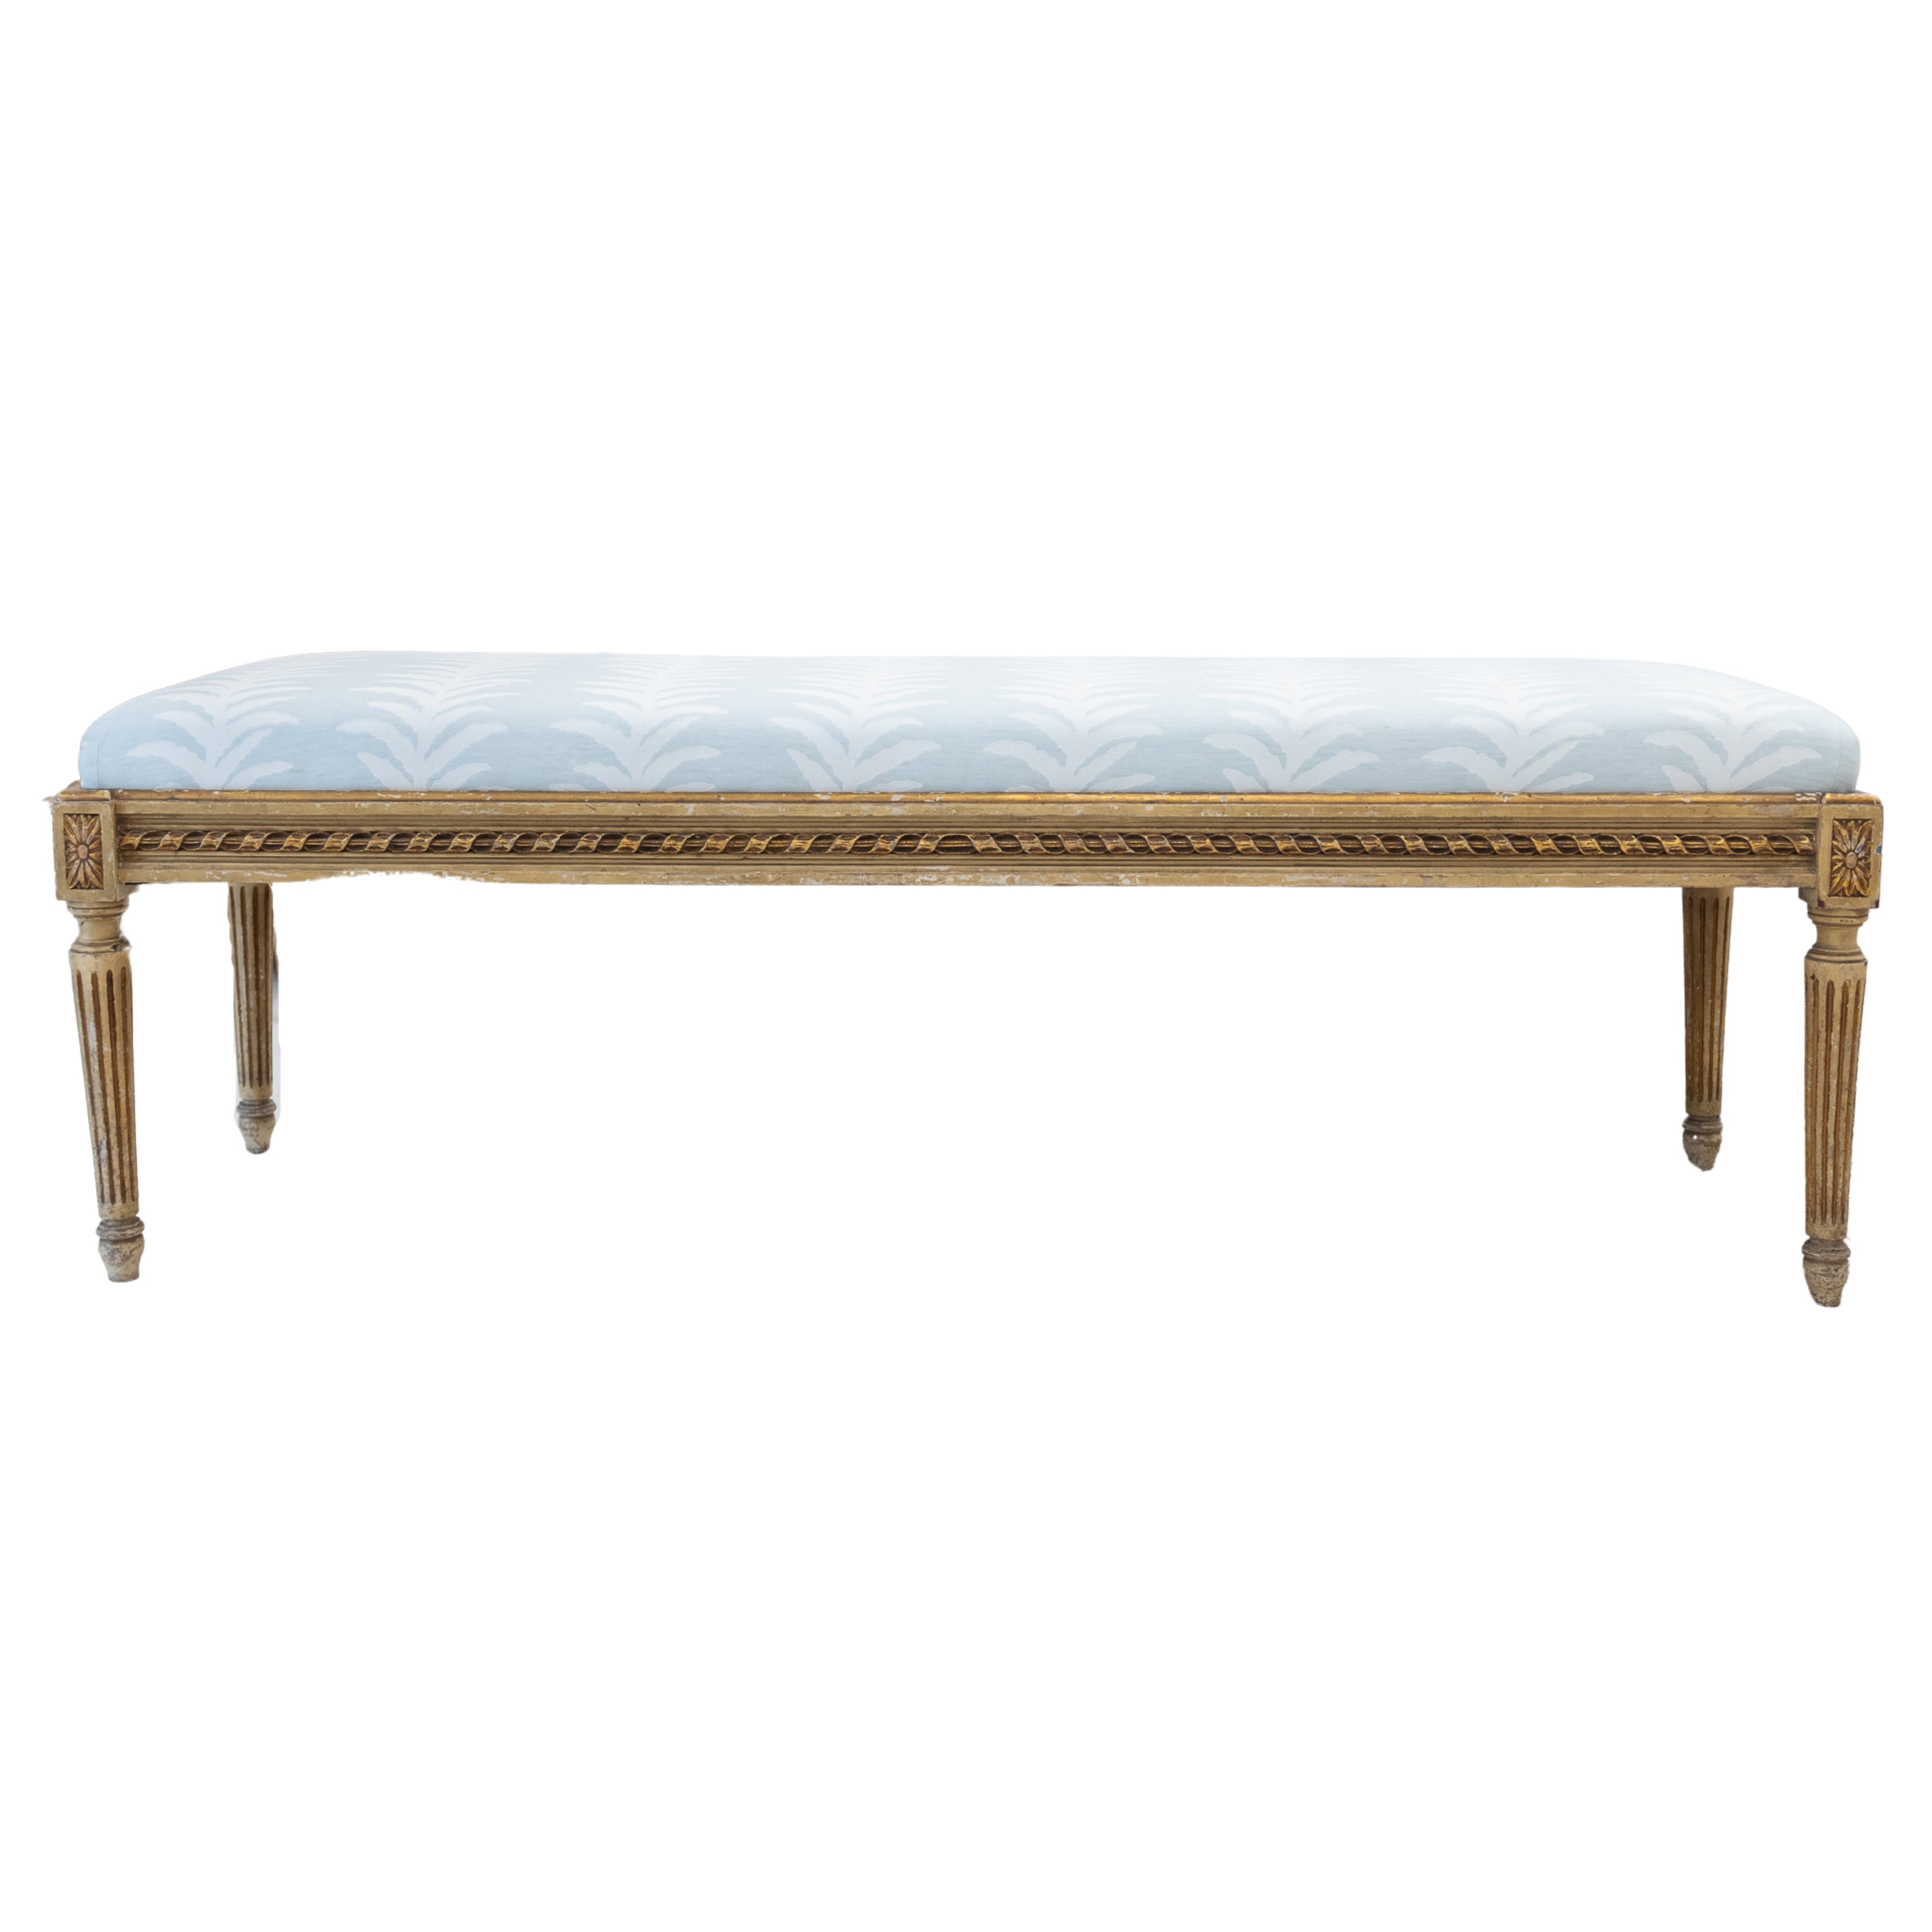 Bench Louis XVI Style Gilded with Blue Floral Fabric